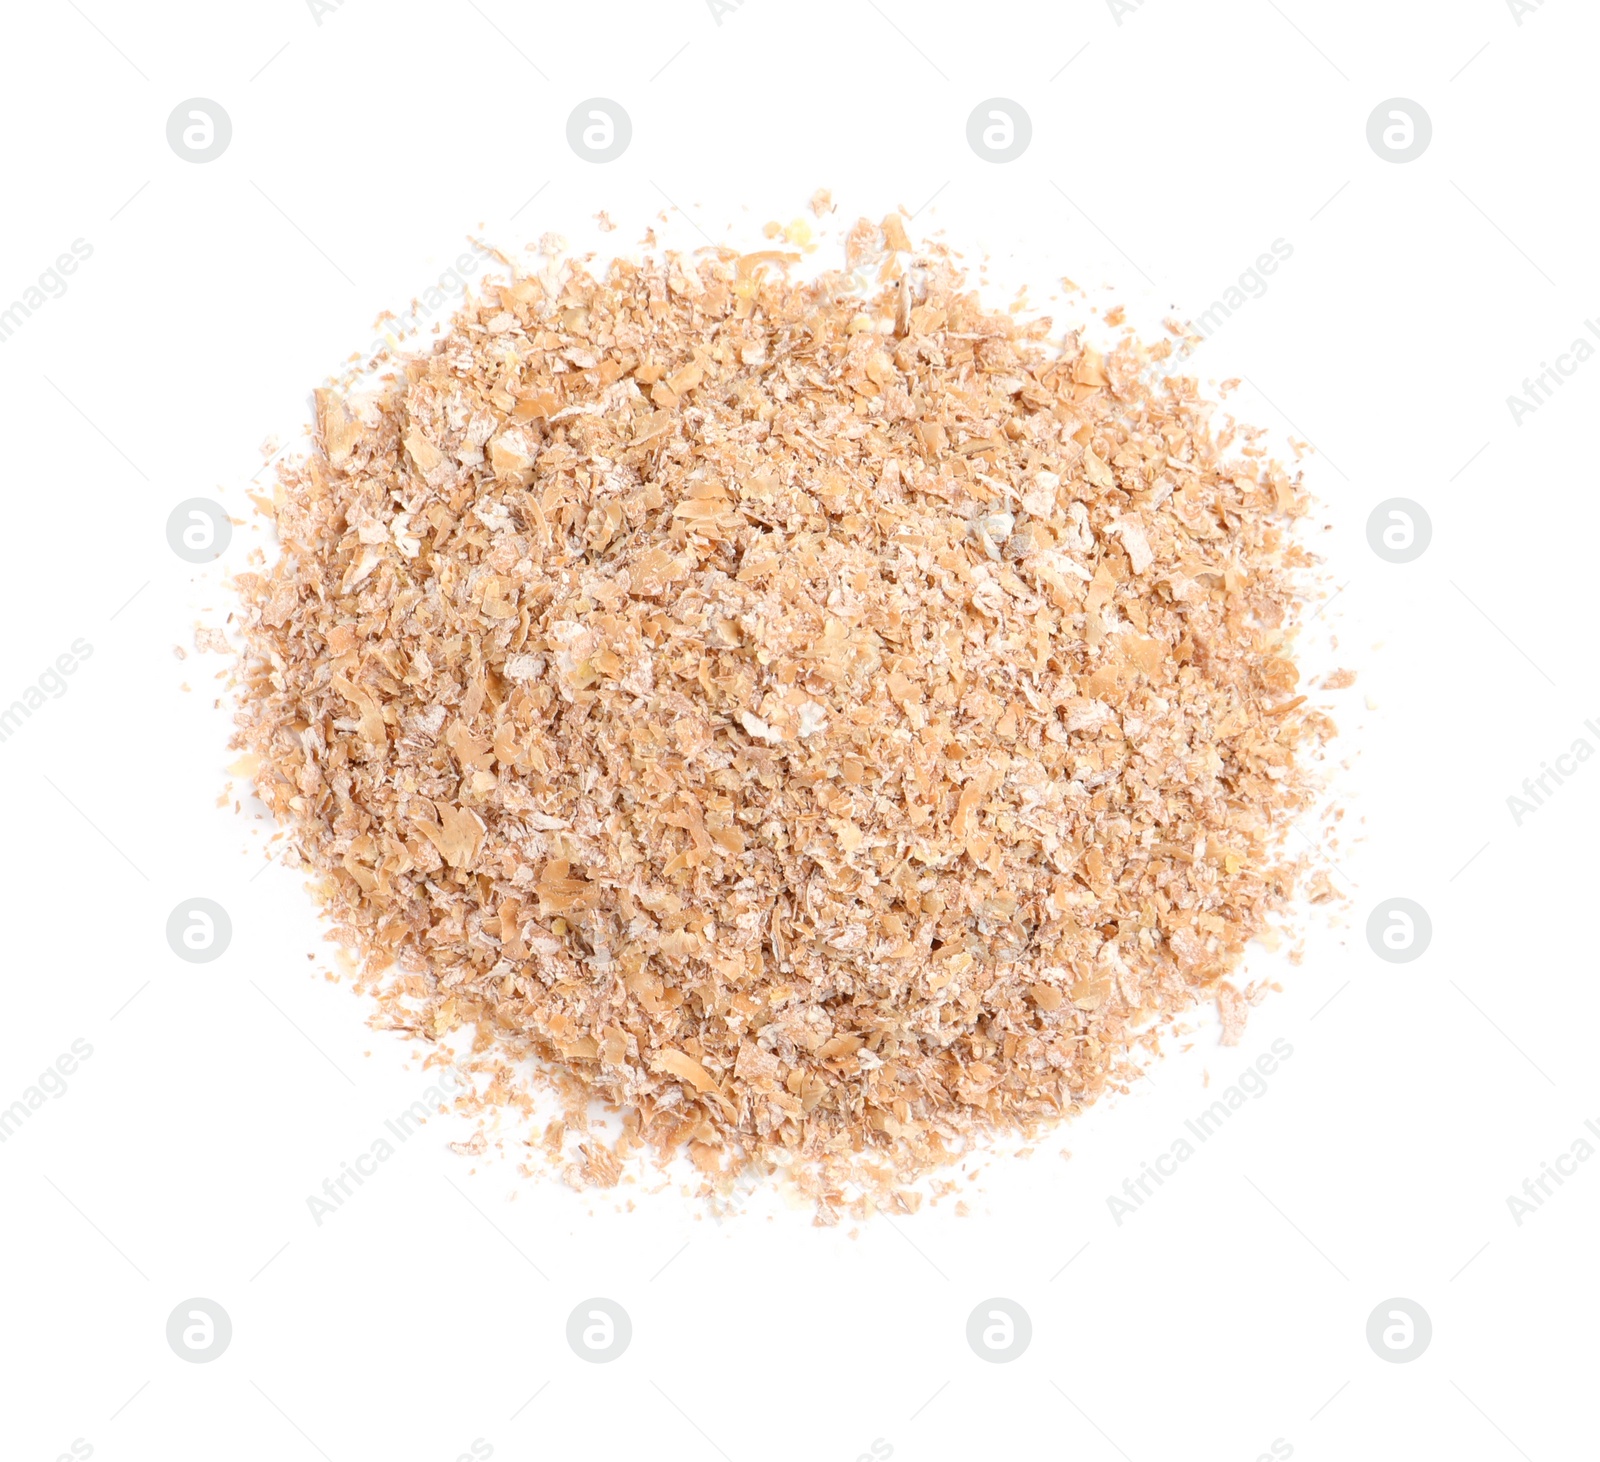 Photo of Pile of wheat bran on white background, top view